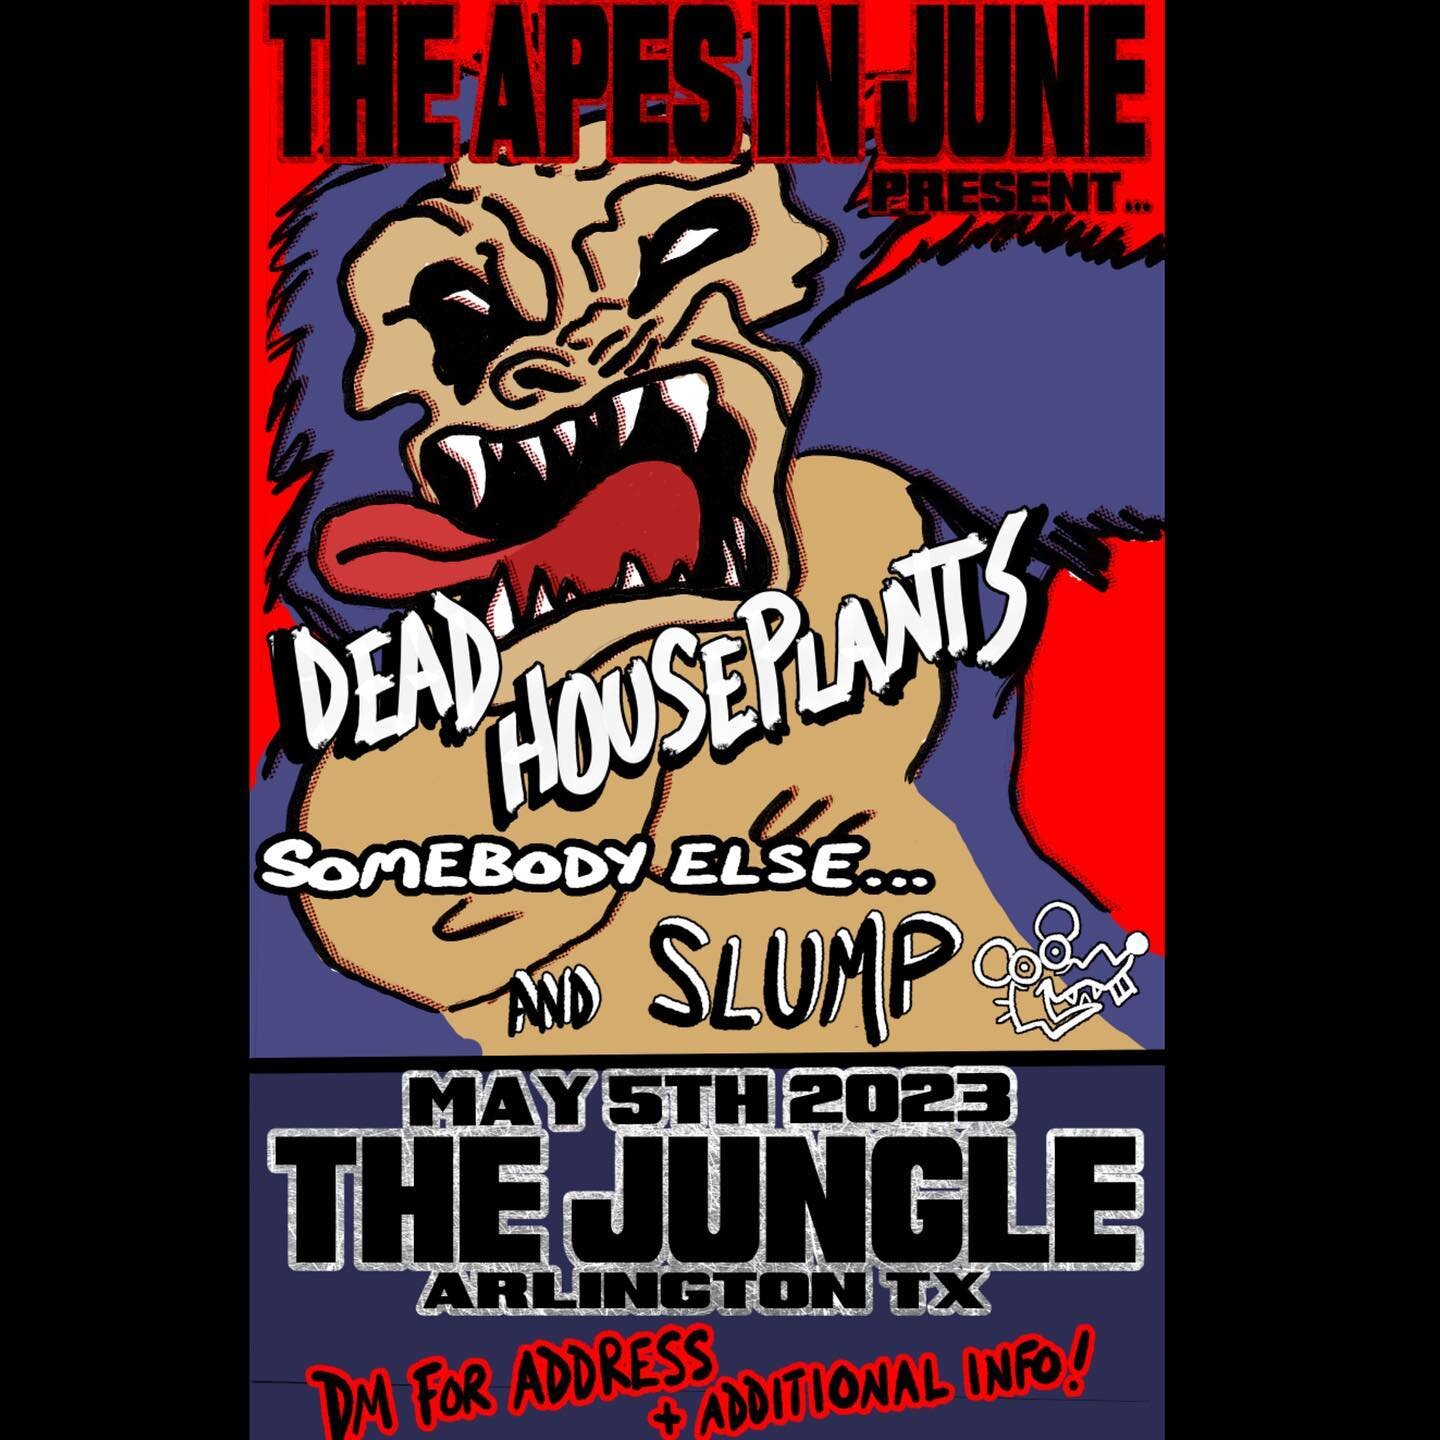 COMING THIS CINCO DE MAYO! 

@theapesinjune IS HOSTING THE THIRD EDITION OF THE JUNGLE HOUSE SHOW SERIES! 

THIS TIME WITH 
@searsstreetofficial 
@somebodyelseband 
@thedeadhouseplants 
and
@slump.theband !

DM @theapesinjune FOR MORE INFO AND ADDRES